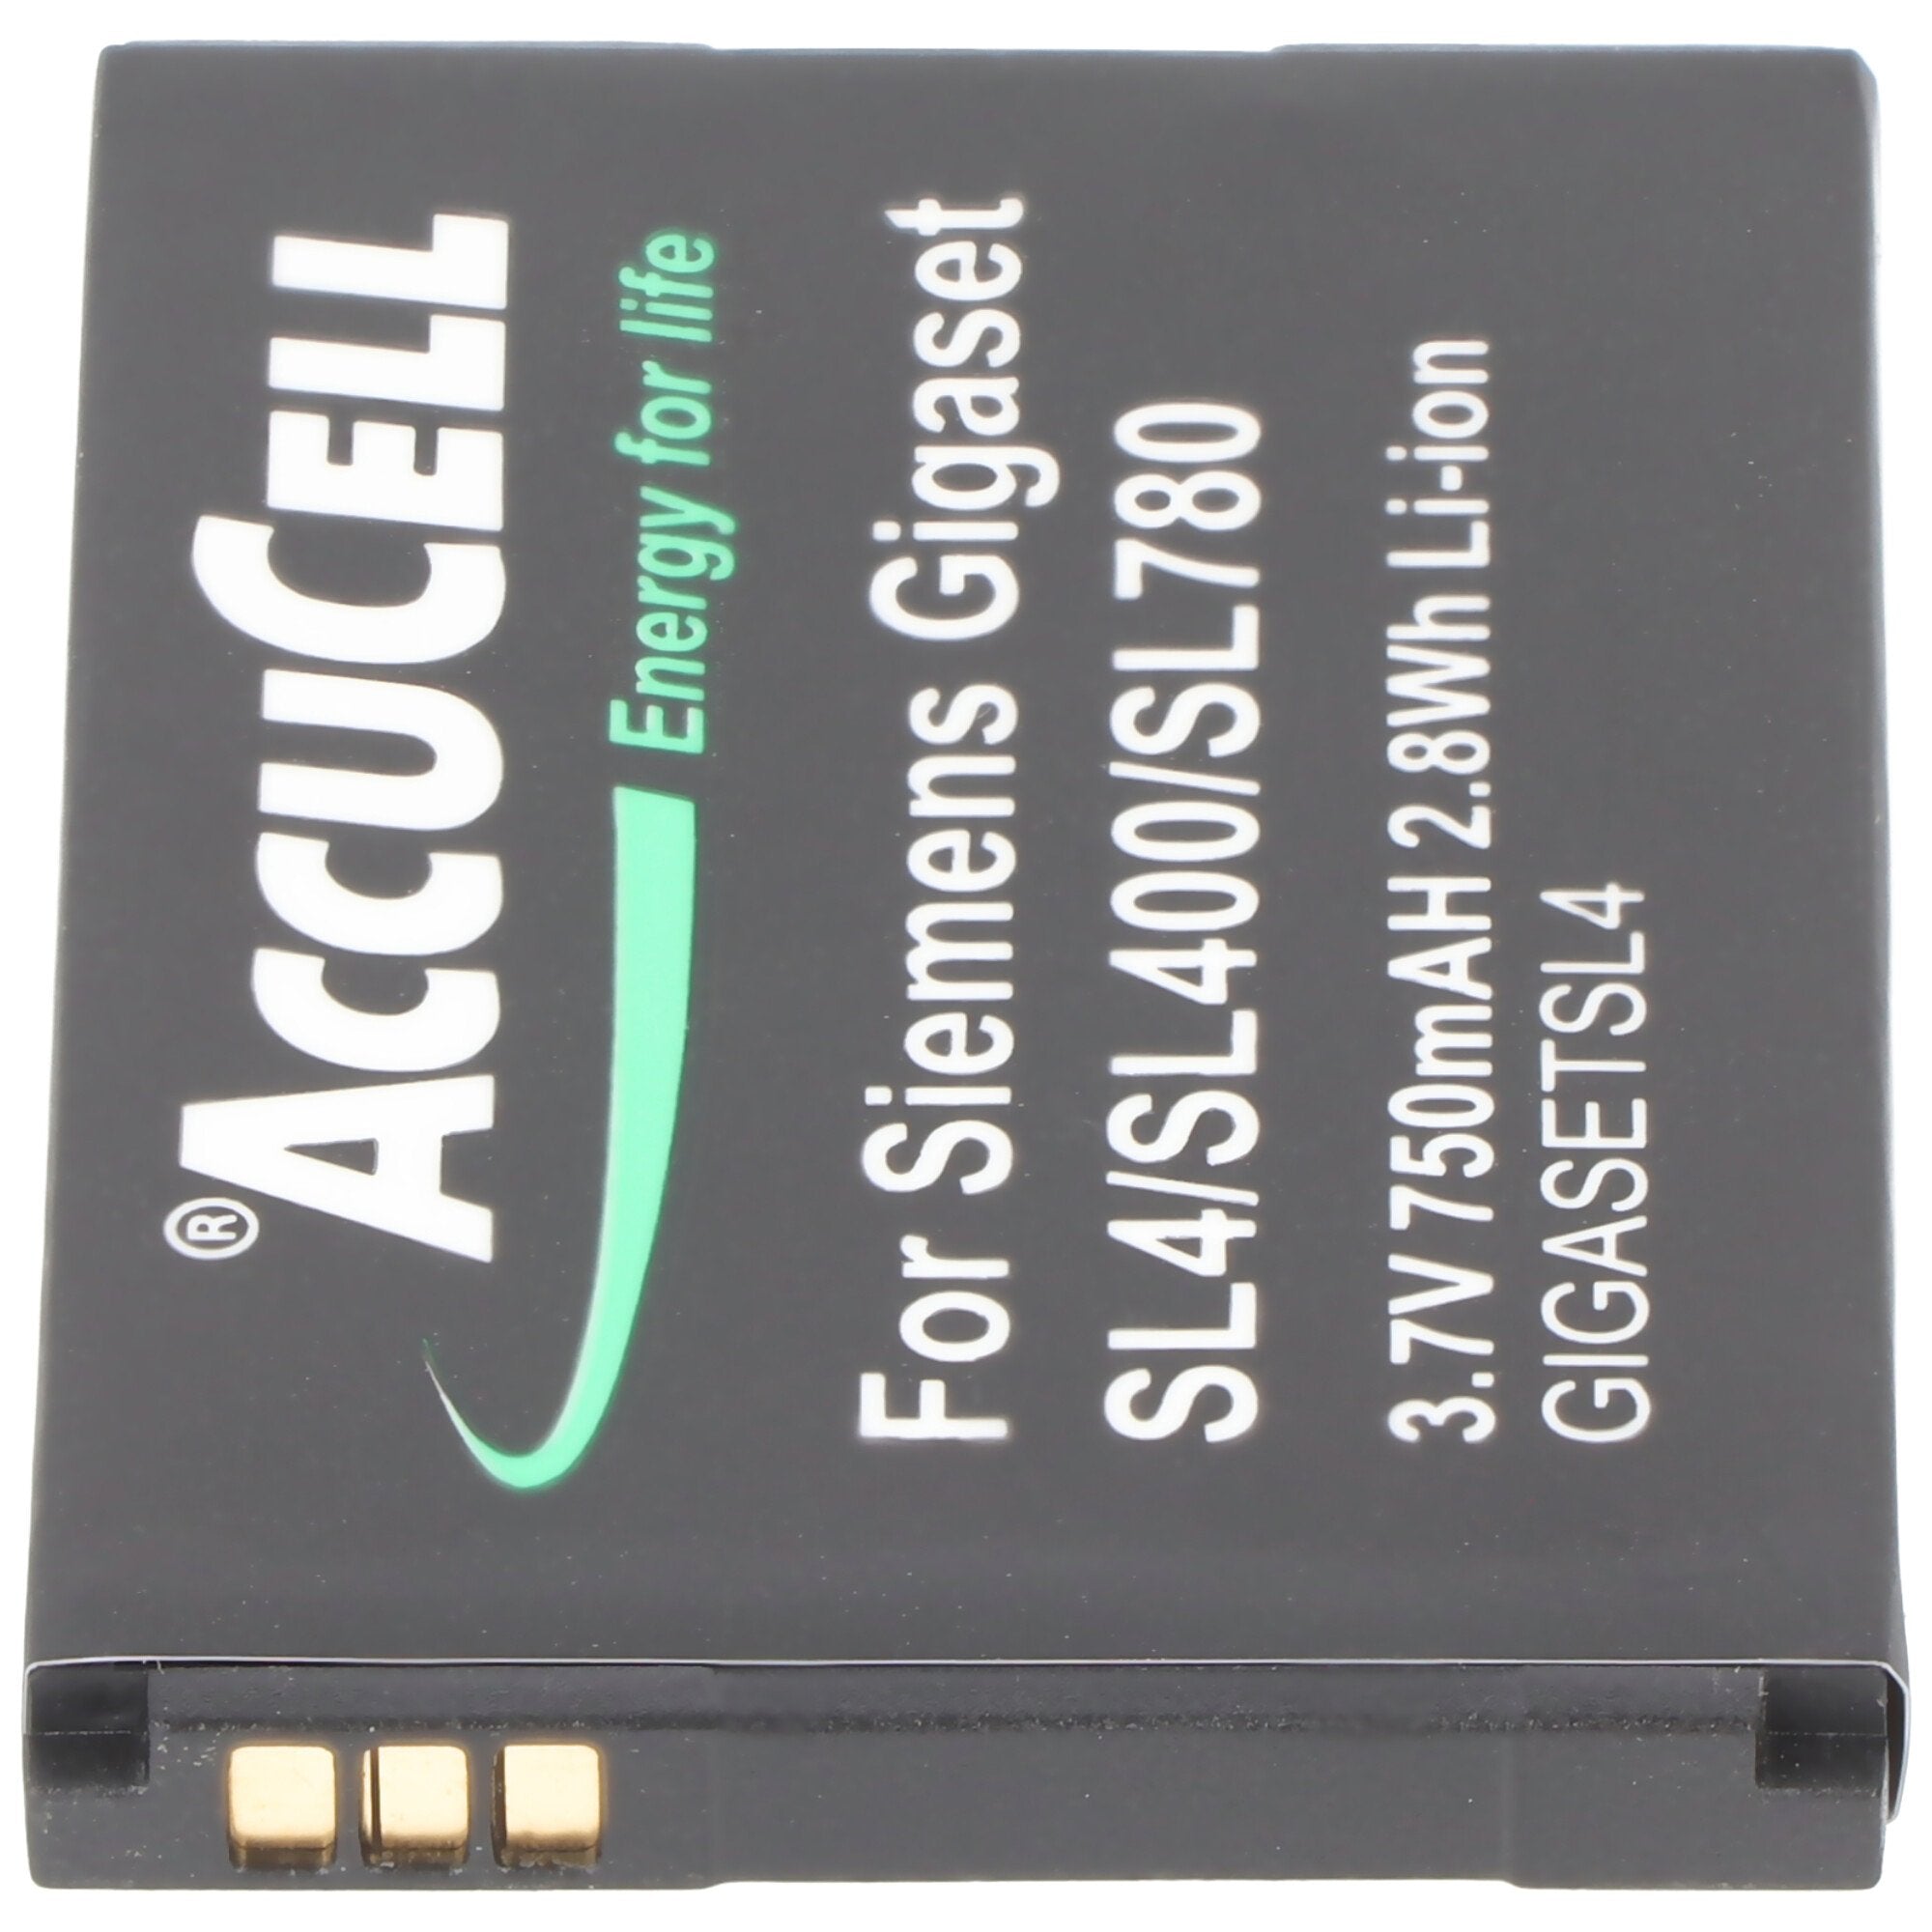 AccuCell battery suitable for Siemens SL4, SL400, SL78, SL780, SL785, SL788